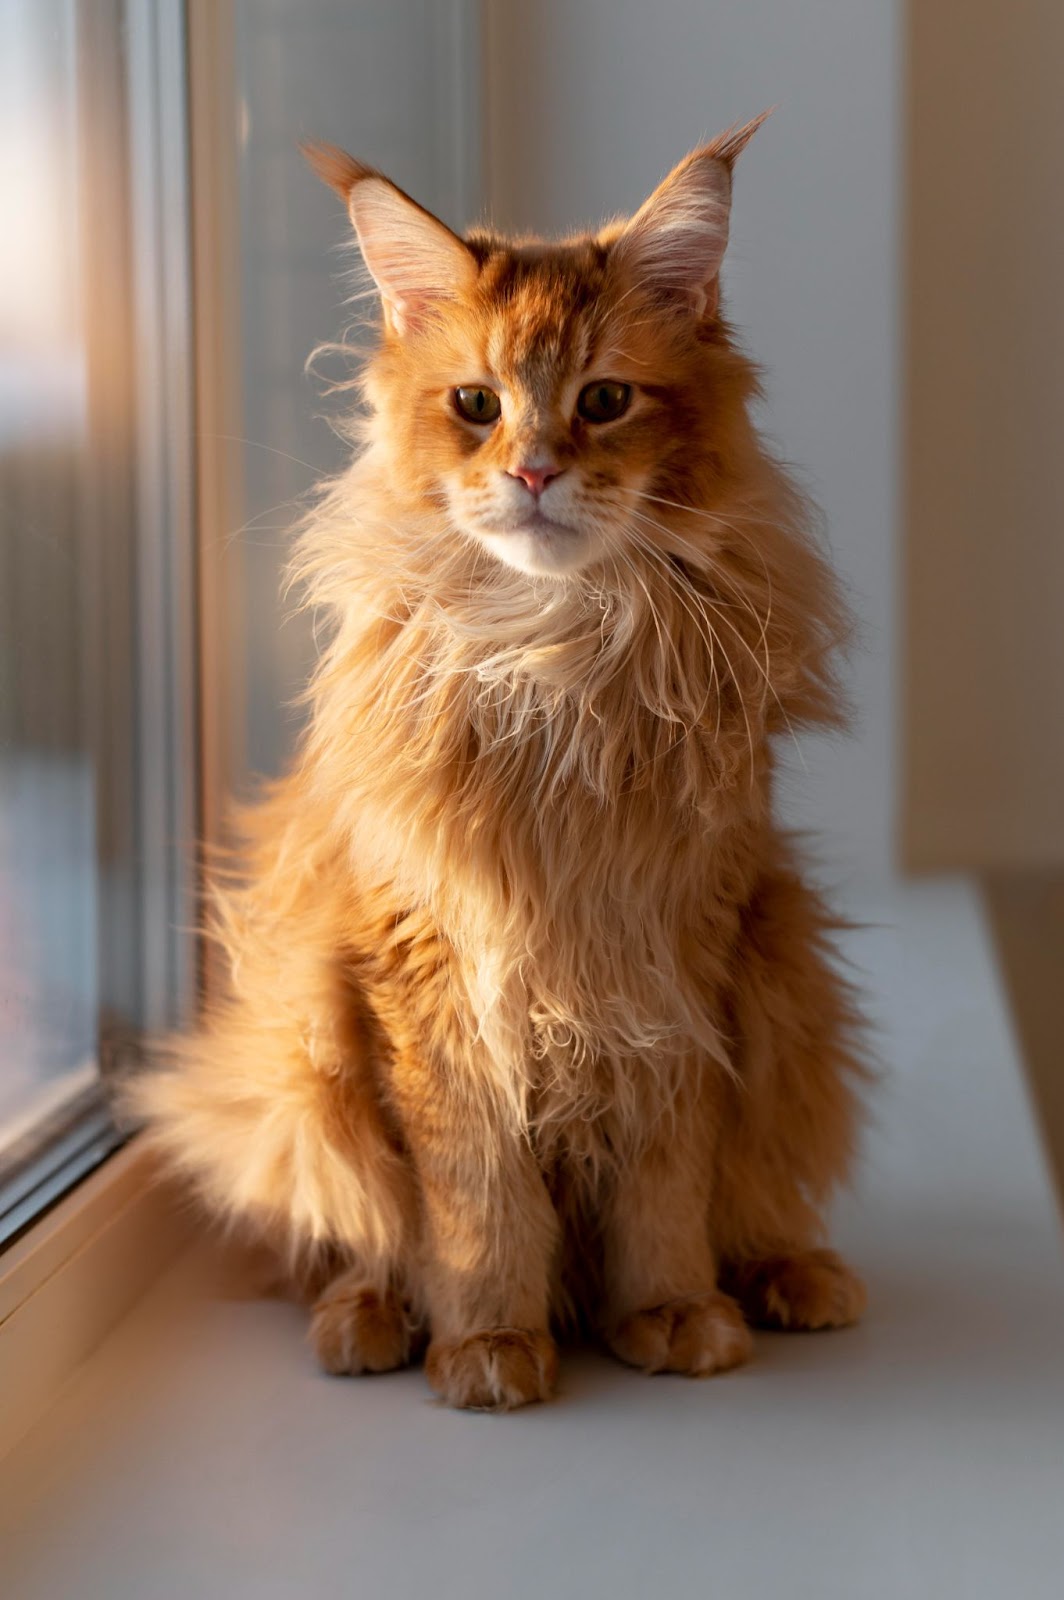 Image of a Maine coon cat breed